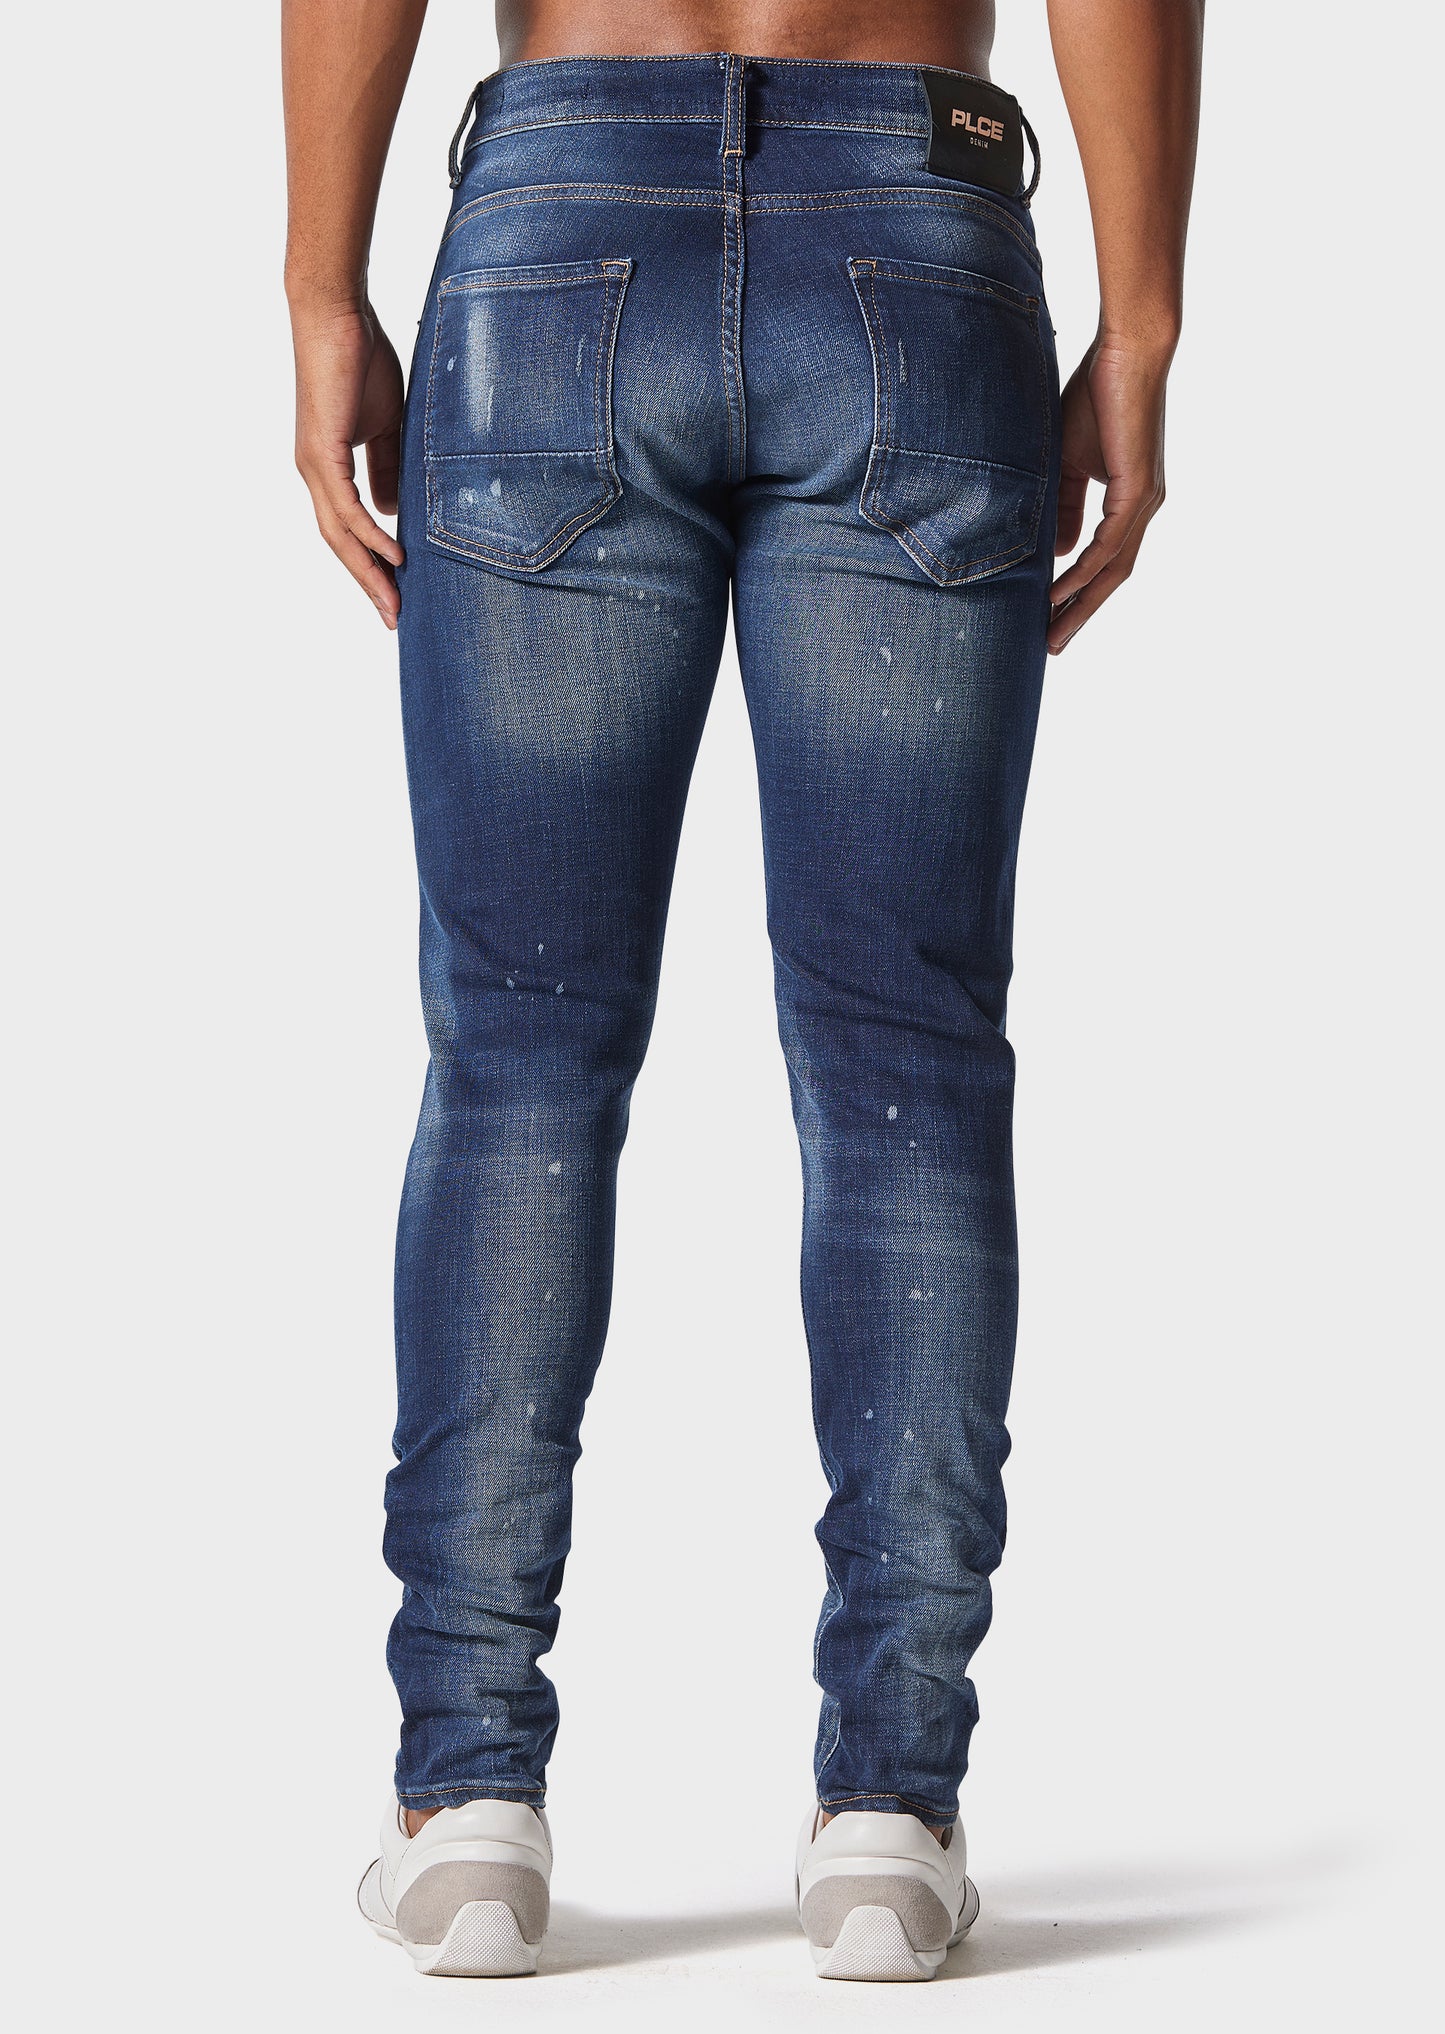 Moriarty COB 915 Slim Fit Jeans